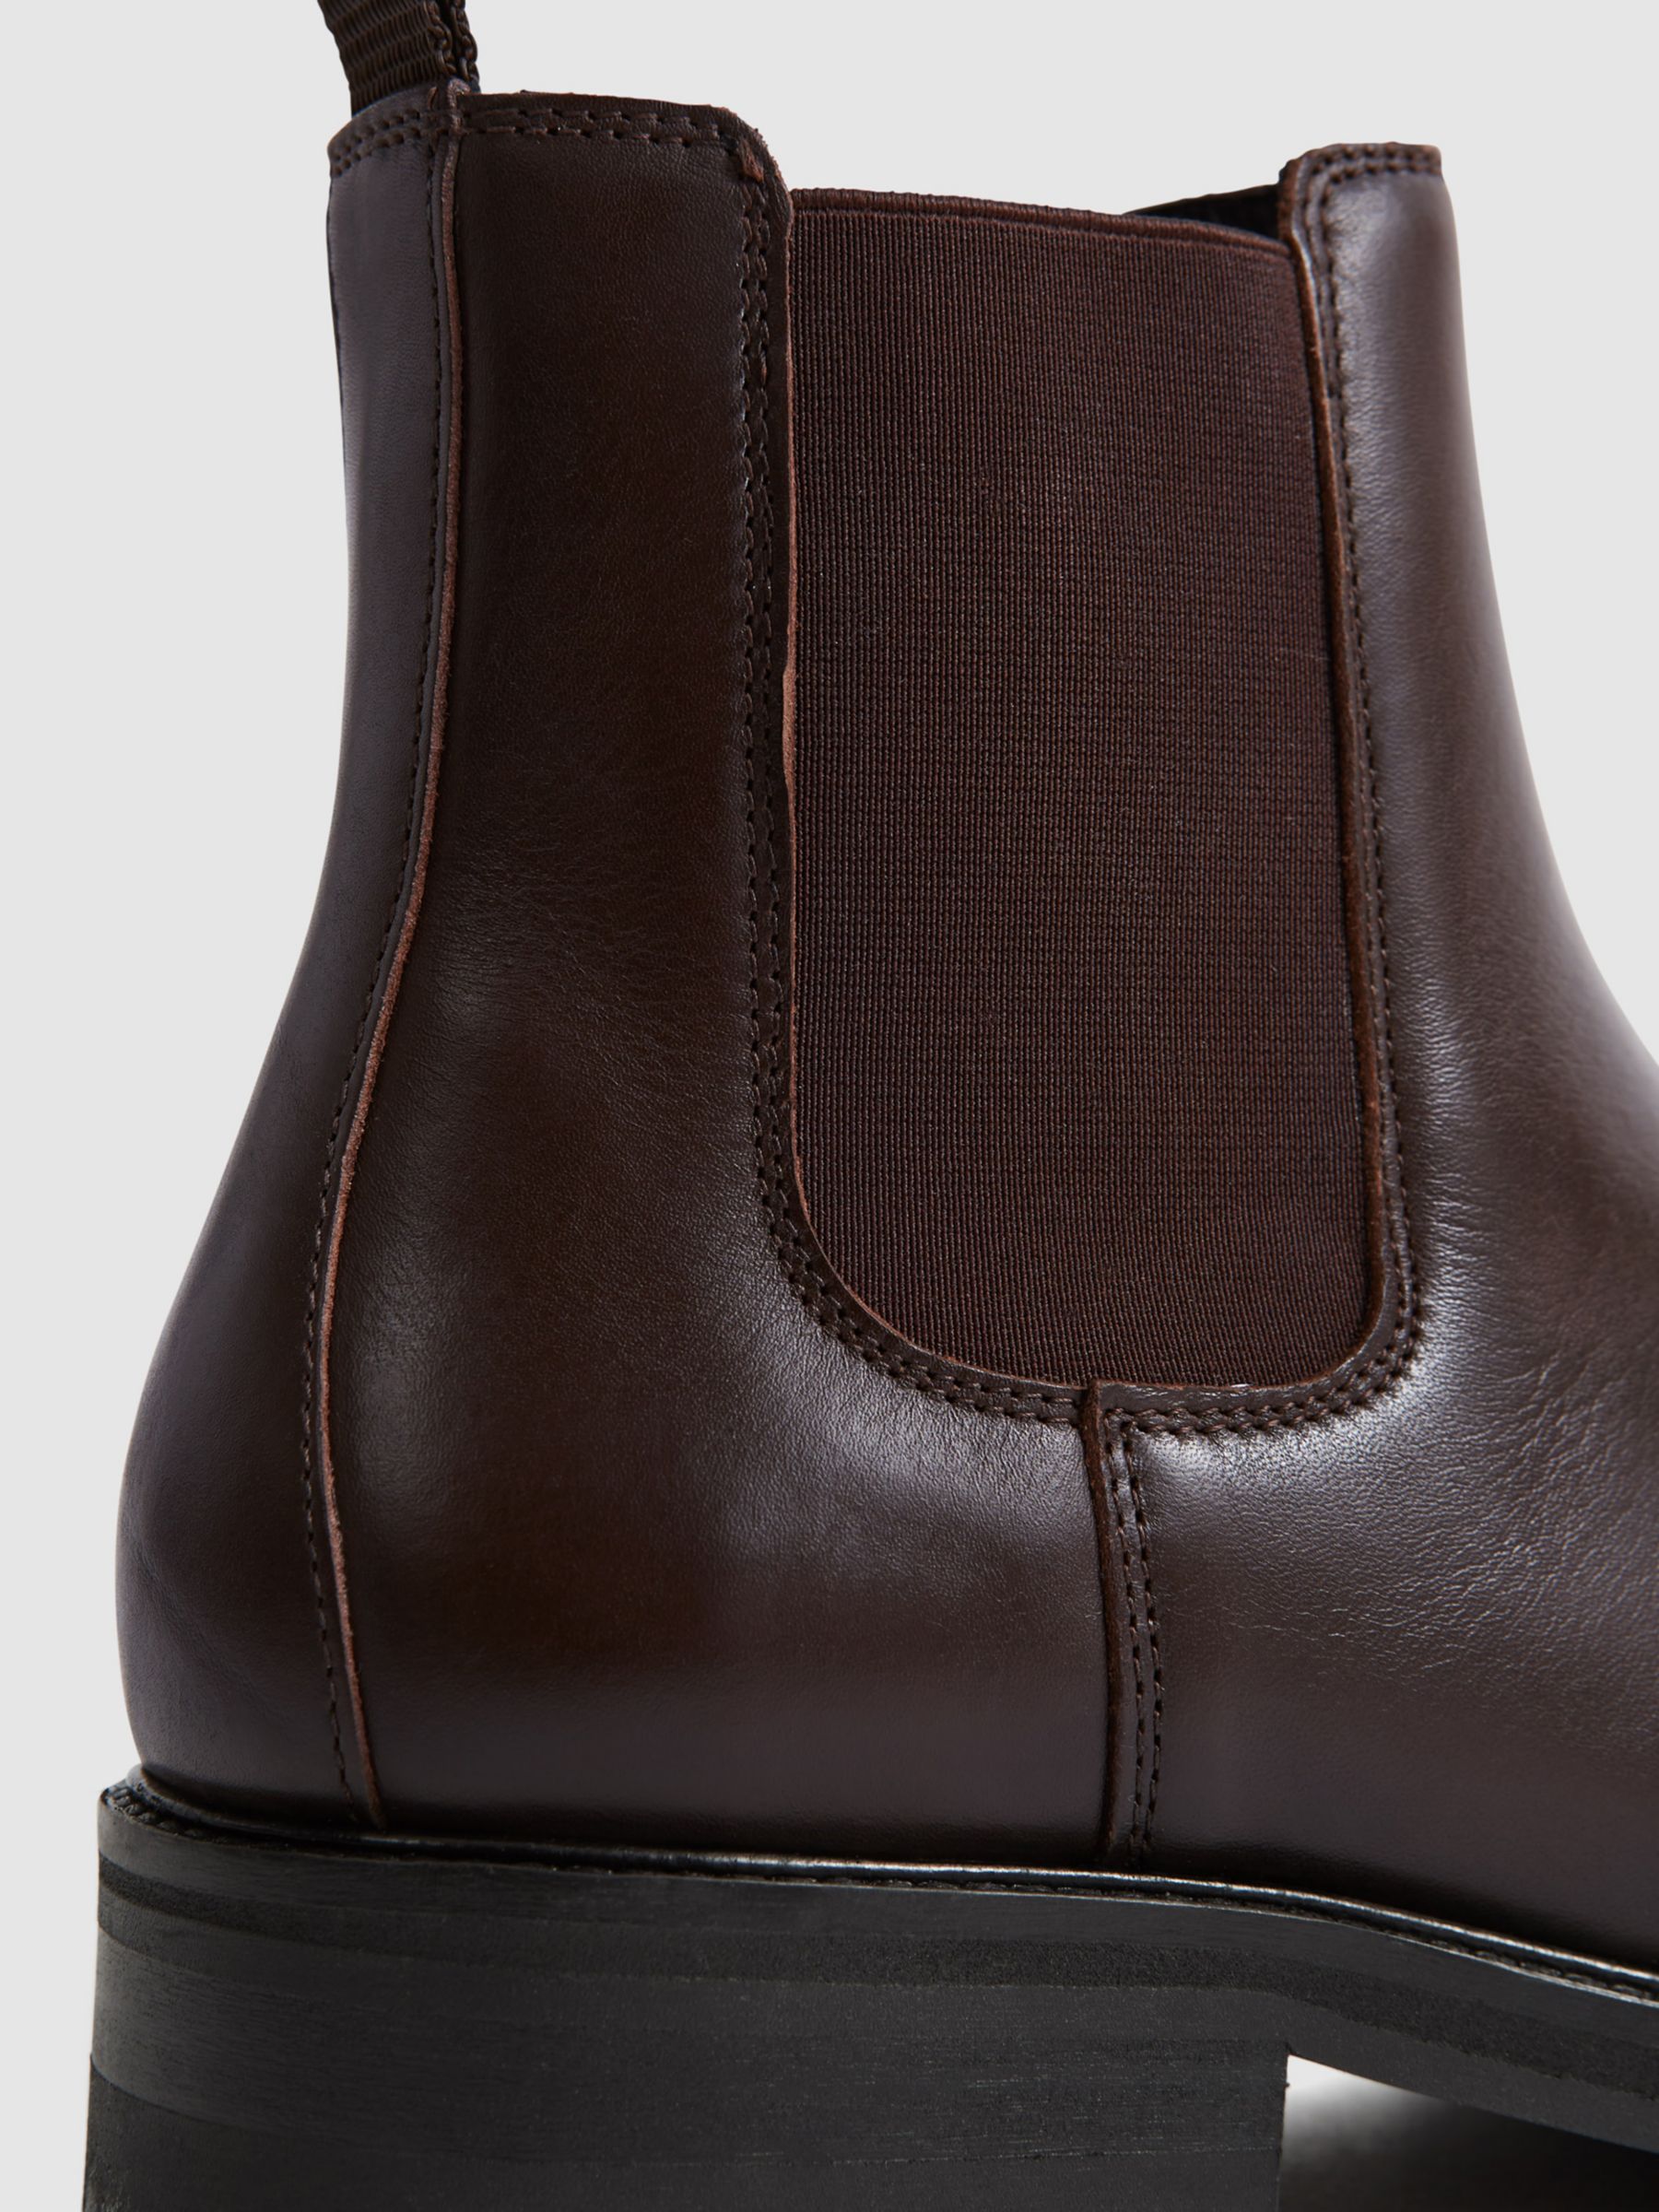 Reiss Chiltern Chelsea Boots, Chocolate, 8